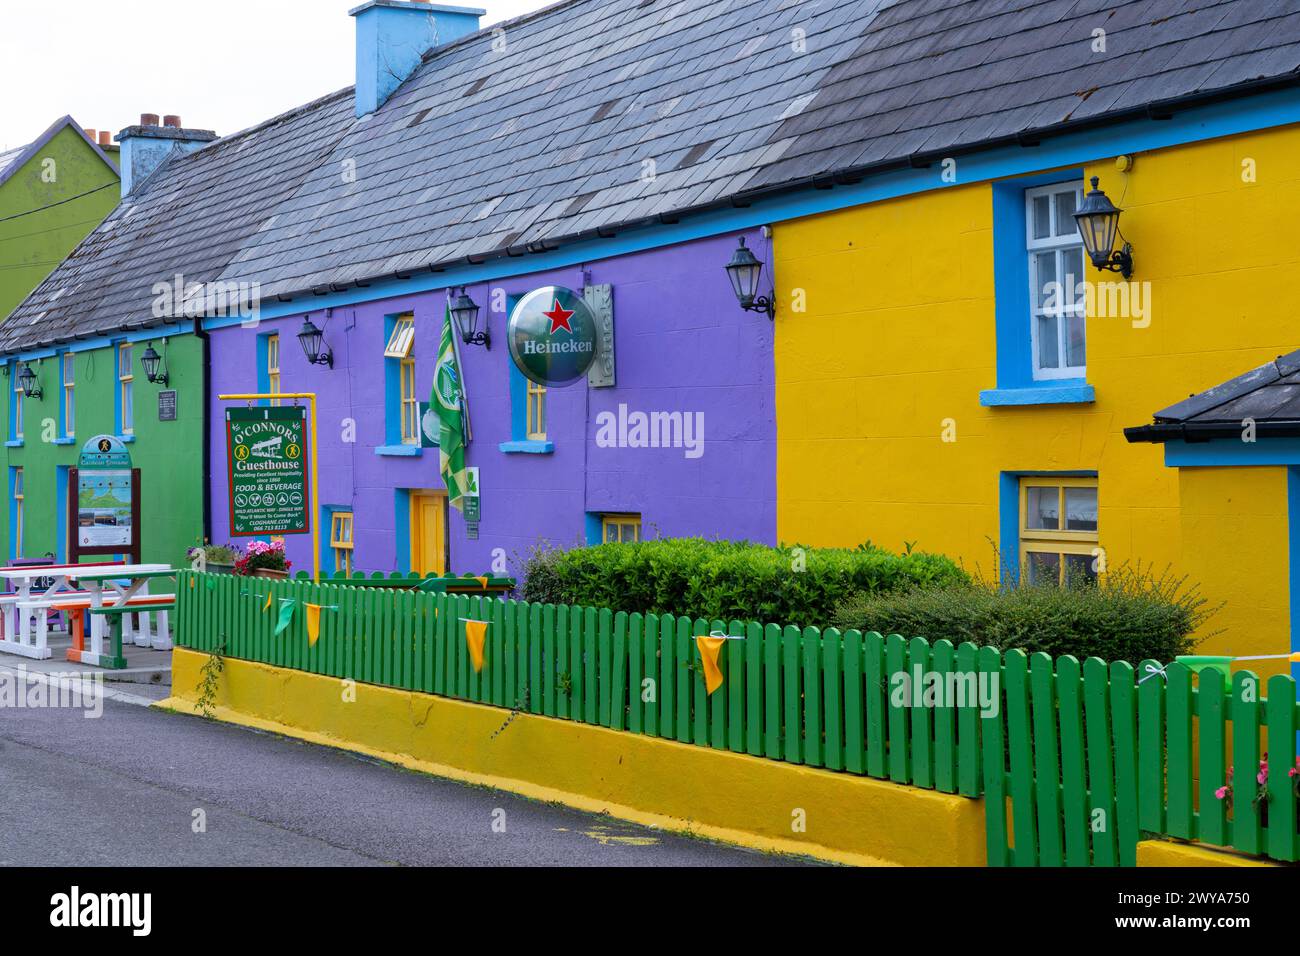 O'Connor's Public House and Guesthouse, Cloghane, County Kerry, Dingle Peninsula, Irland, August. Stockfoto